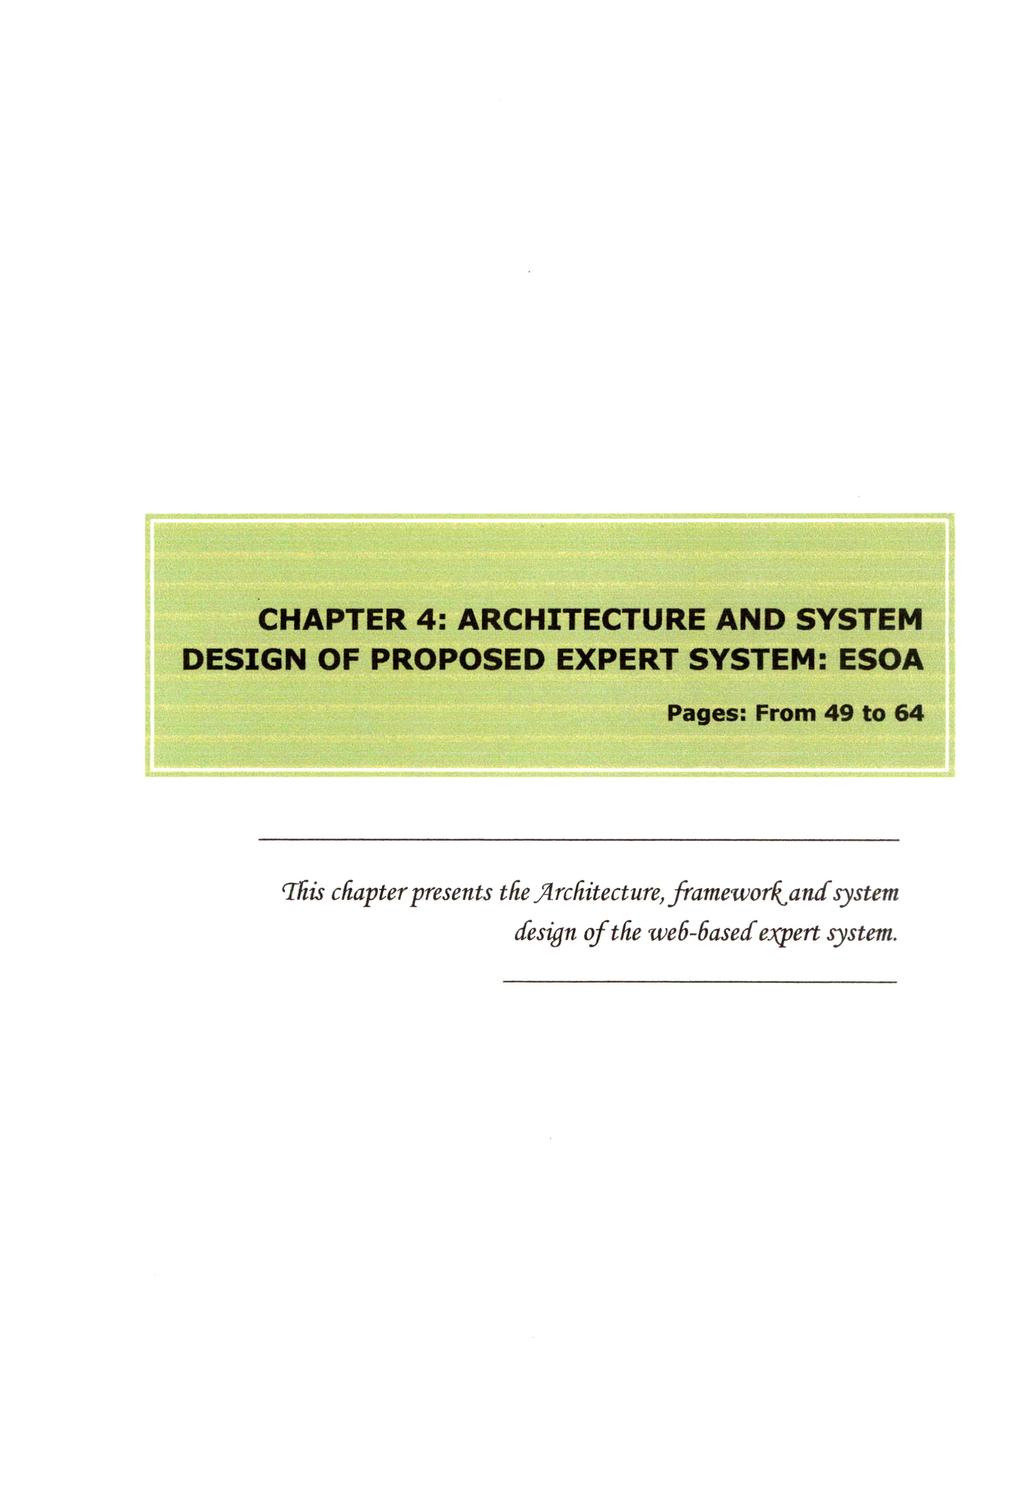 CHAPTER 4: ARCHITECTURE AND SYSTEM DESIGN OF PROPOSED EXPERT SYSTEM: ESOA Pages: From 49 to 64